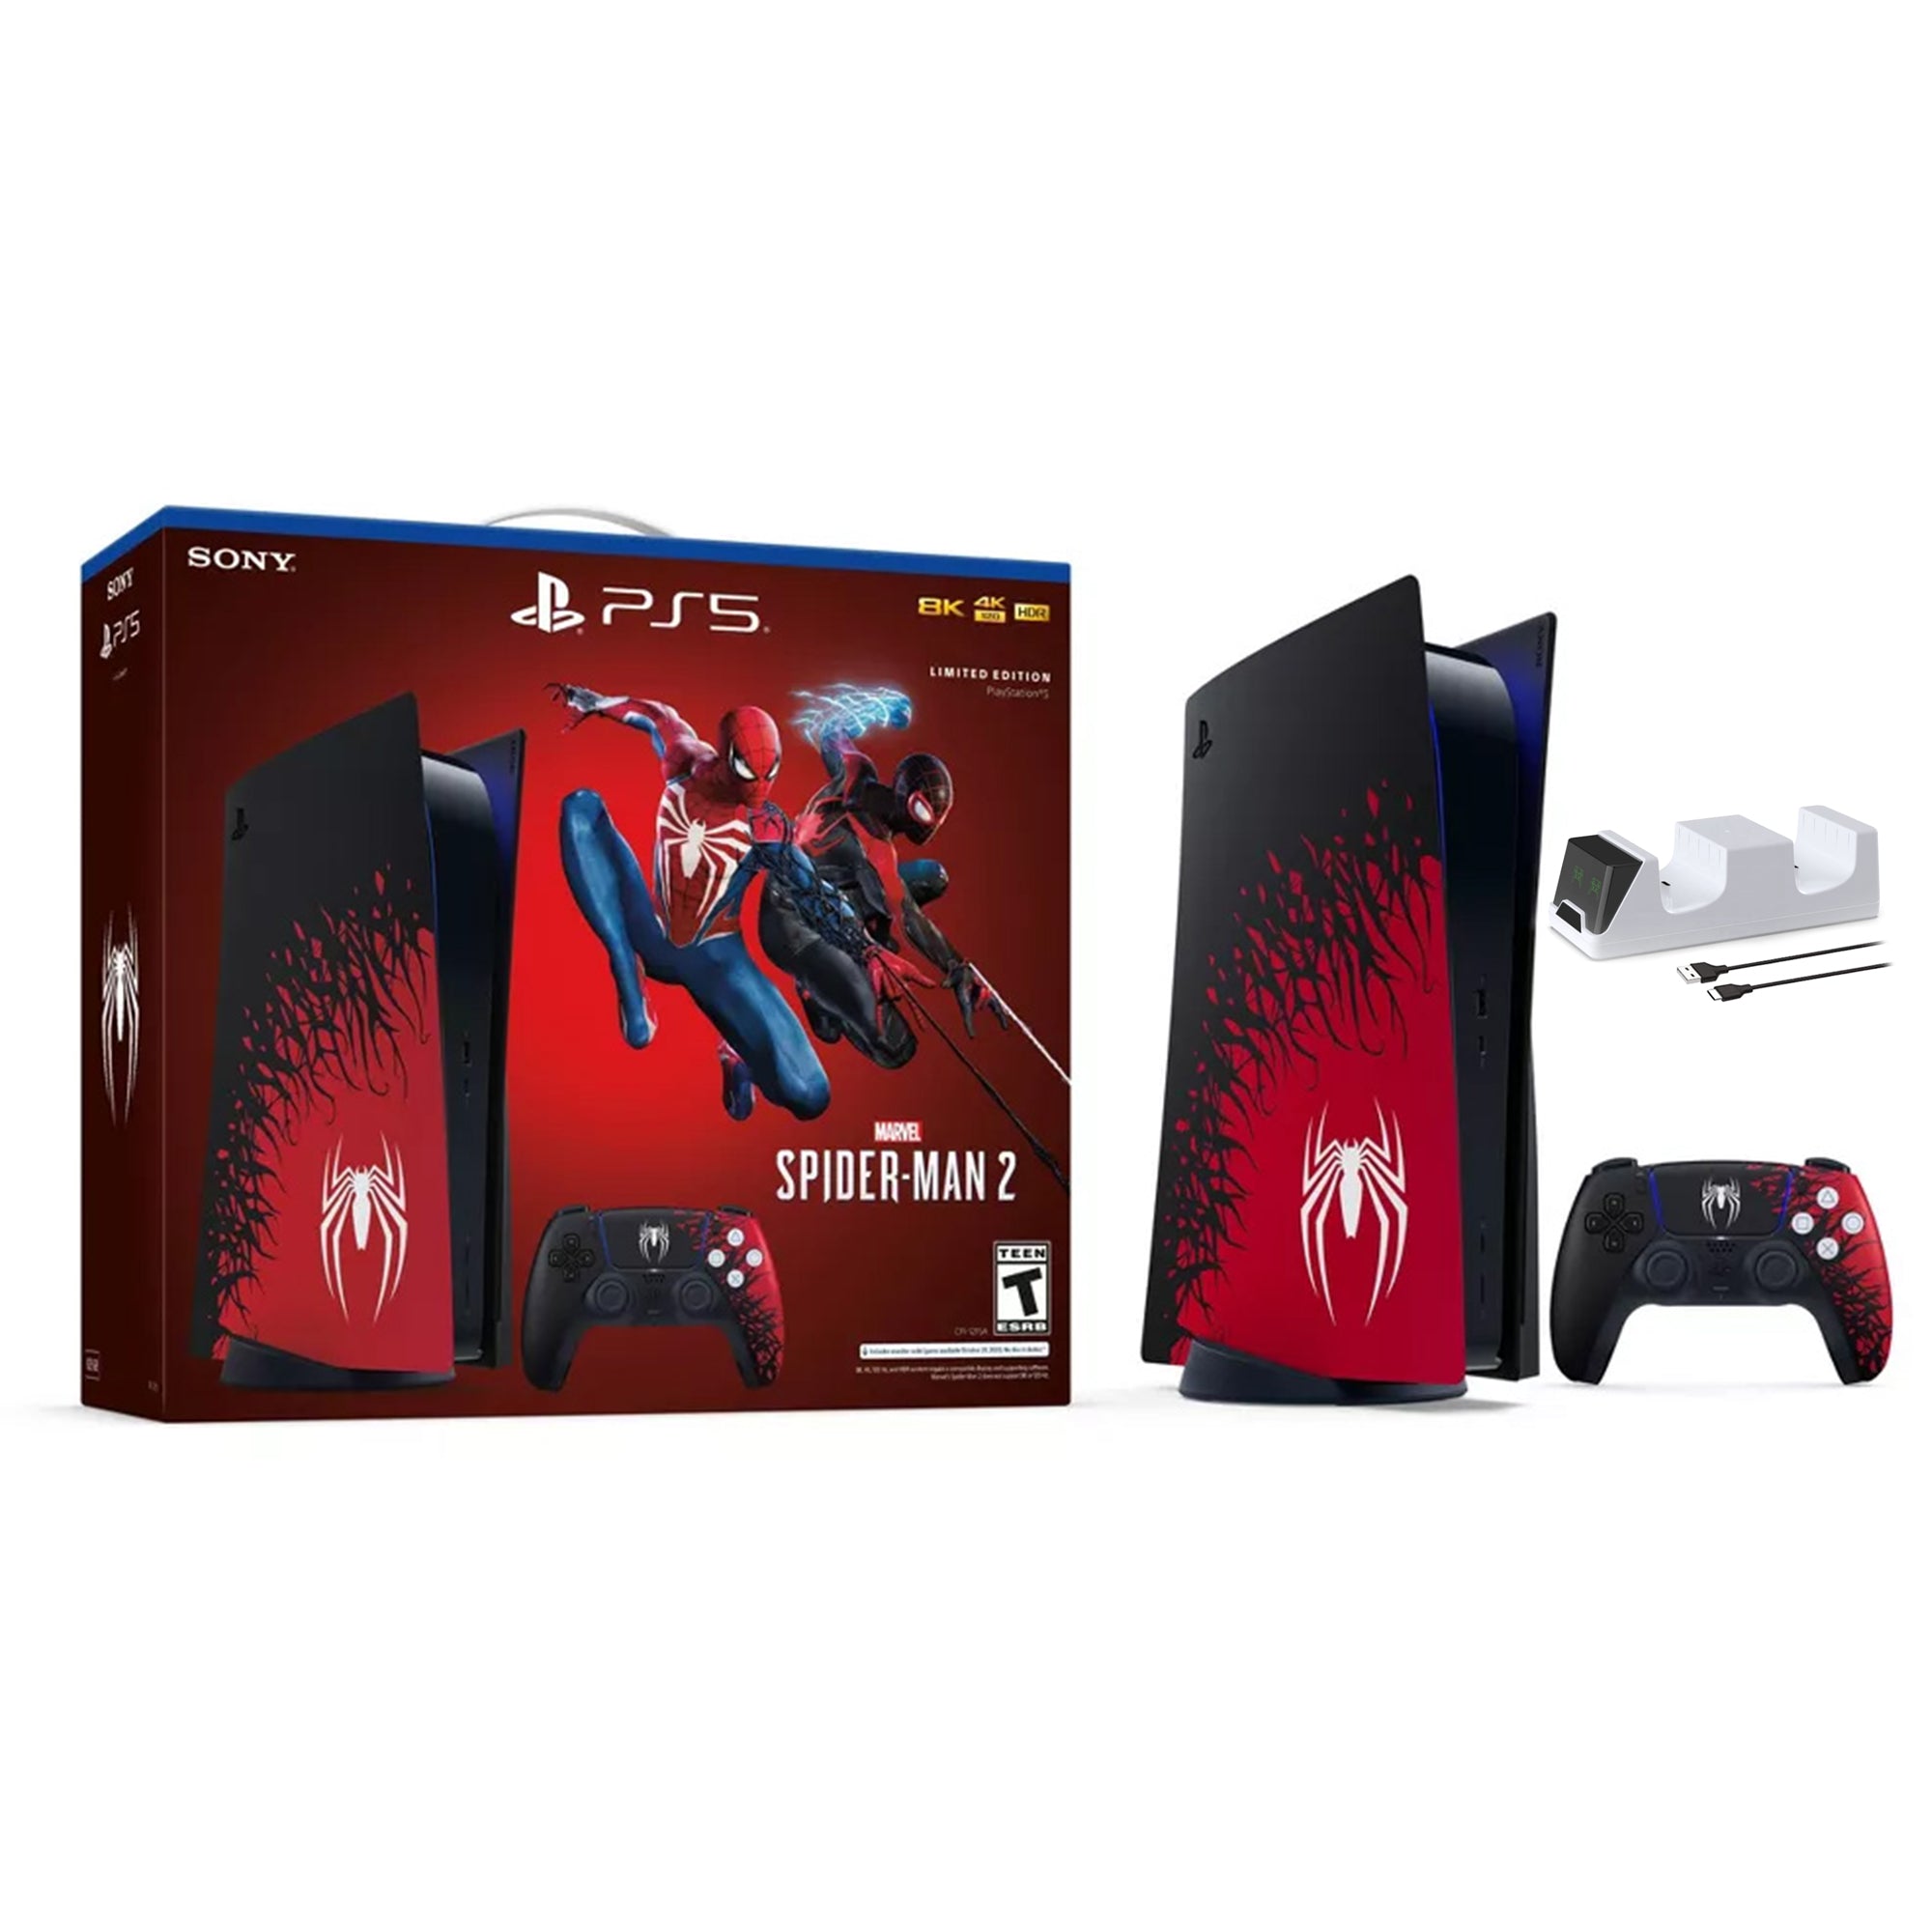 PlayStation 5 Disc Spider-Man 2 Limited Edition Bundle: SpiderMan 2 Console, Controller and Game, with Mytrix Controller Charger - Black/Red, PS5 825GB Gaming Console